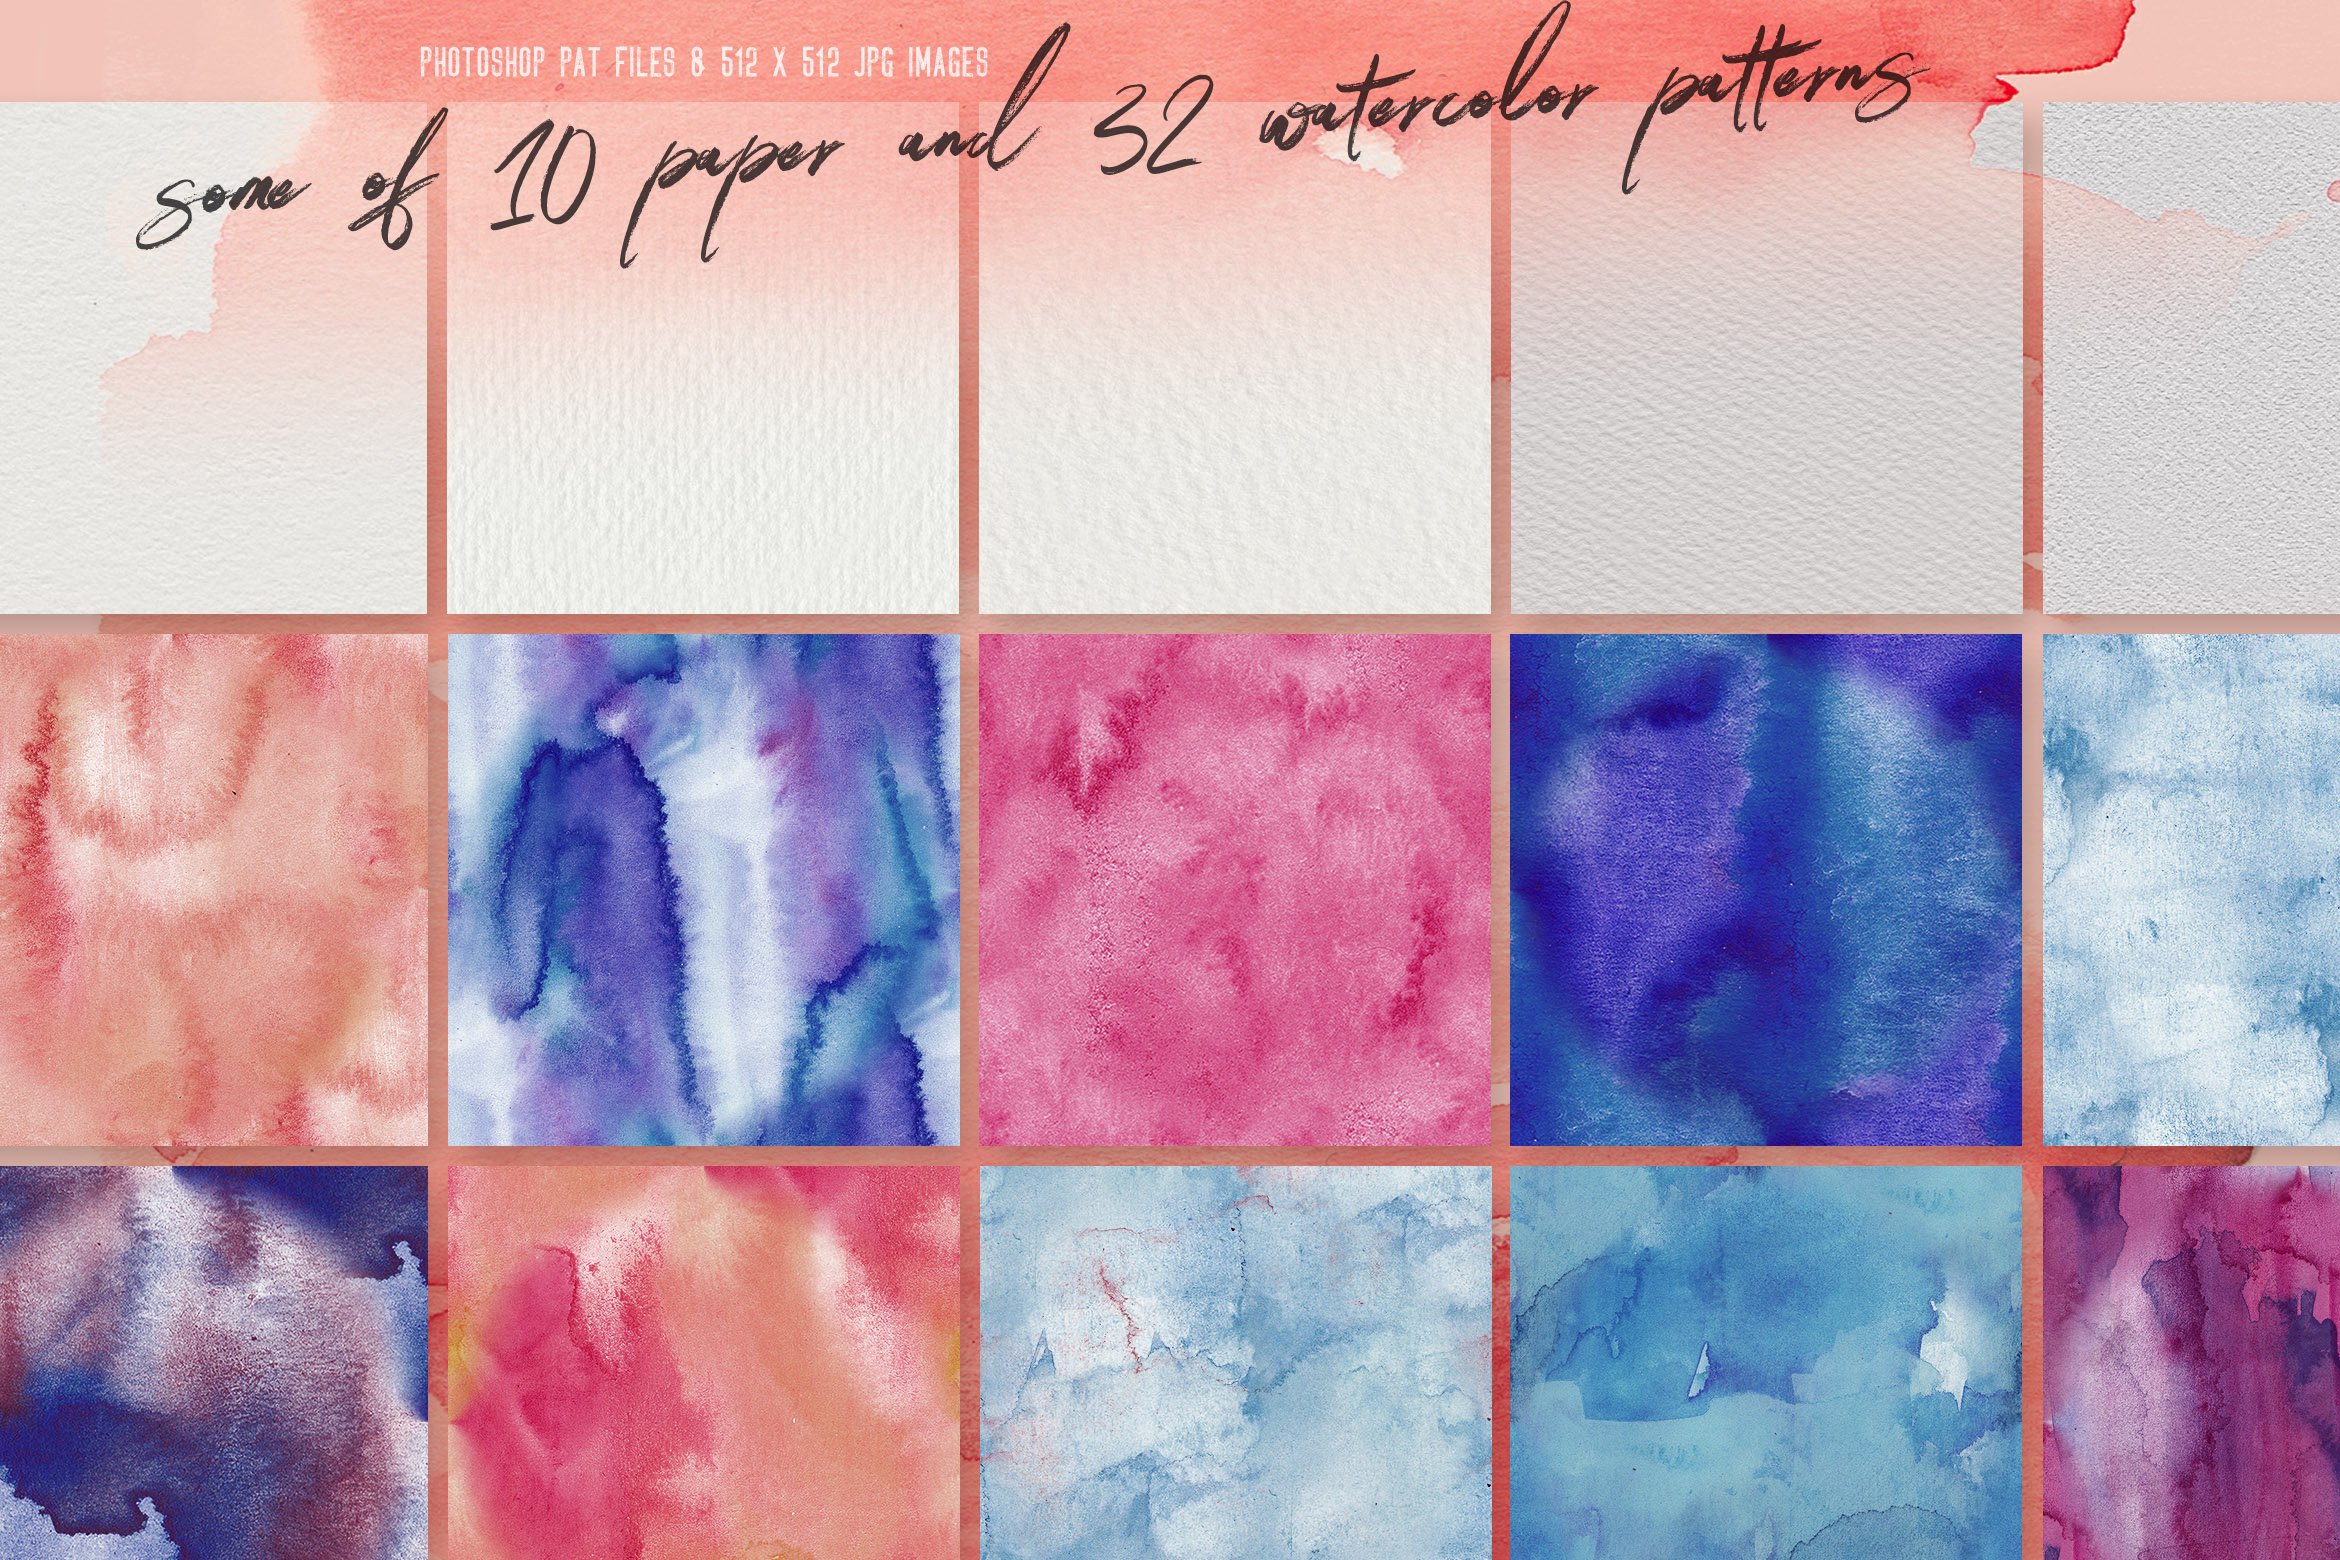 There are some of 10 paper and 32 watercolor patterns.